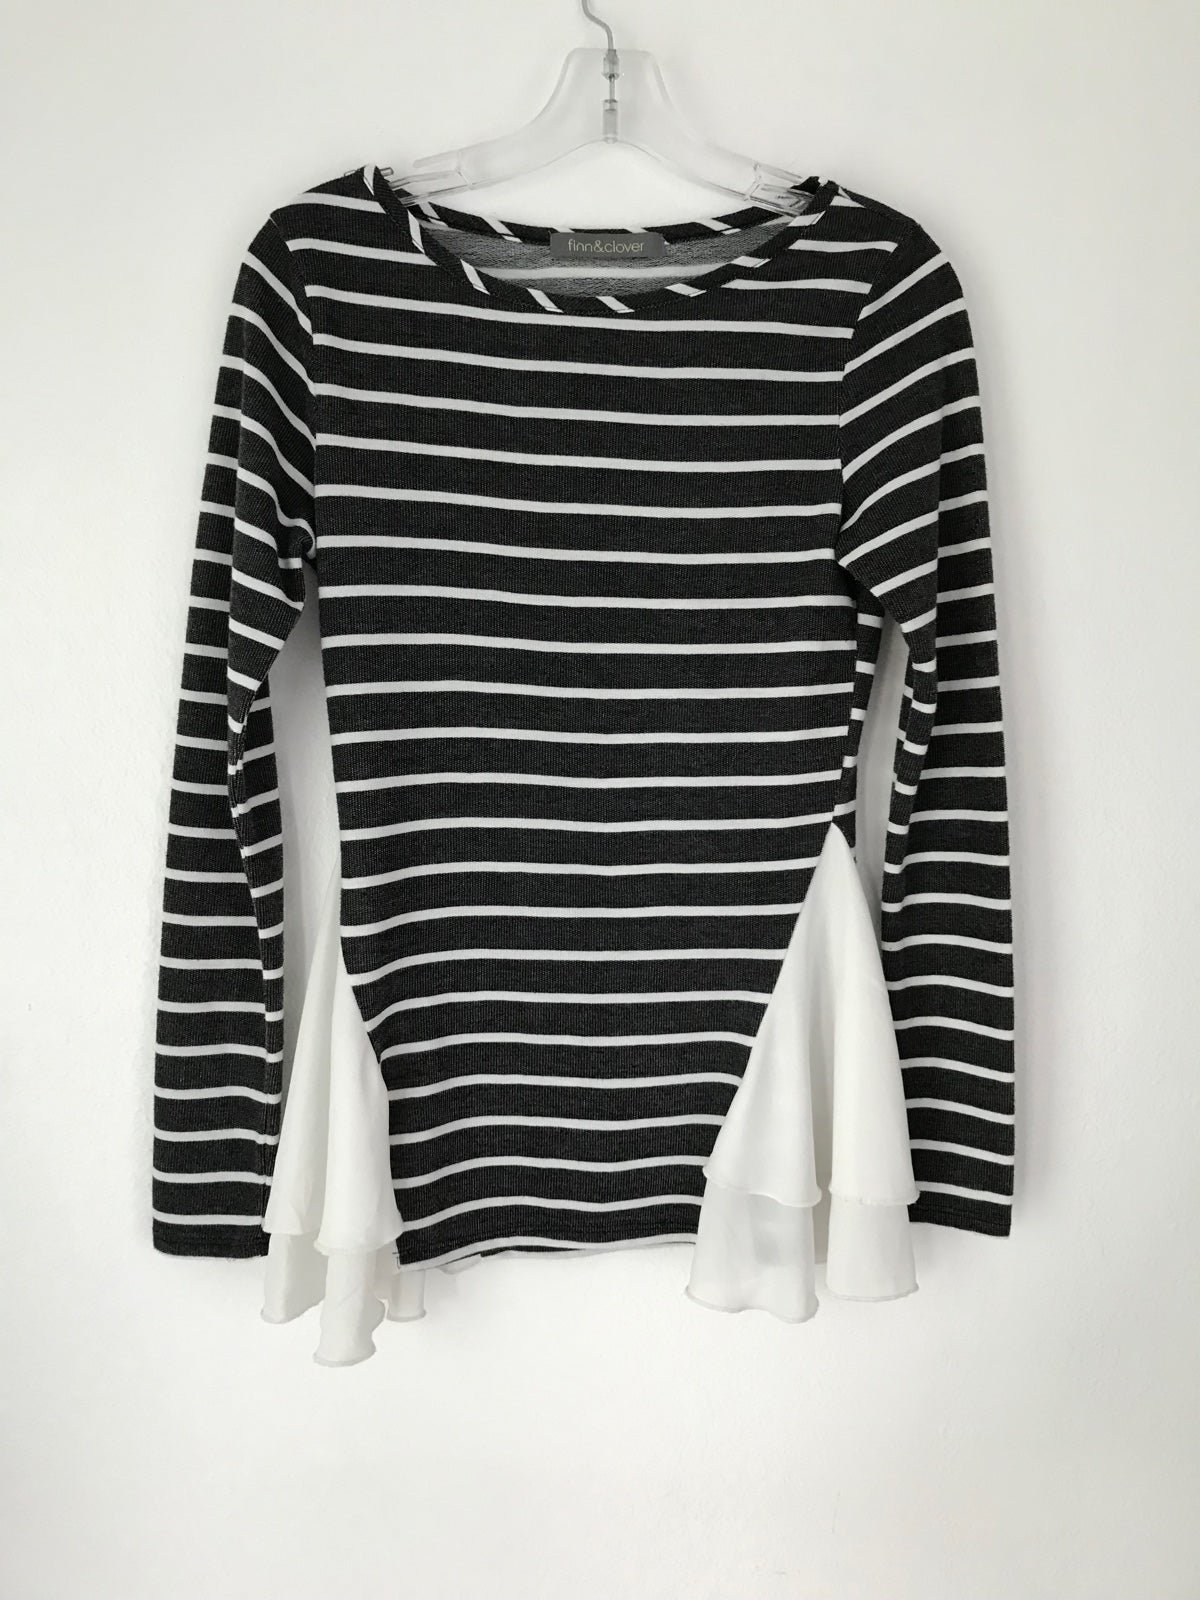 high discount Knit top striped long sleeve gray white w